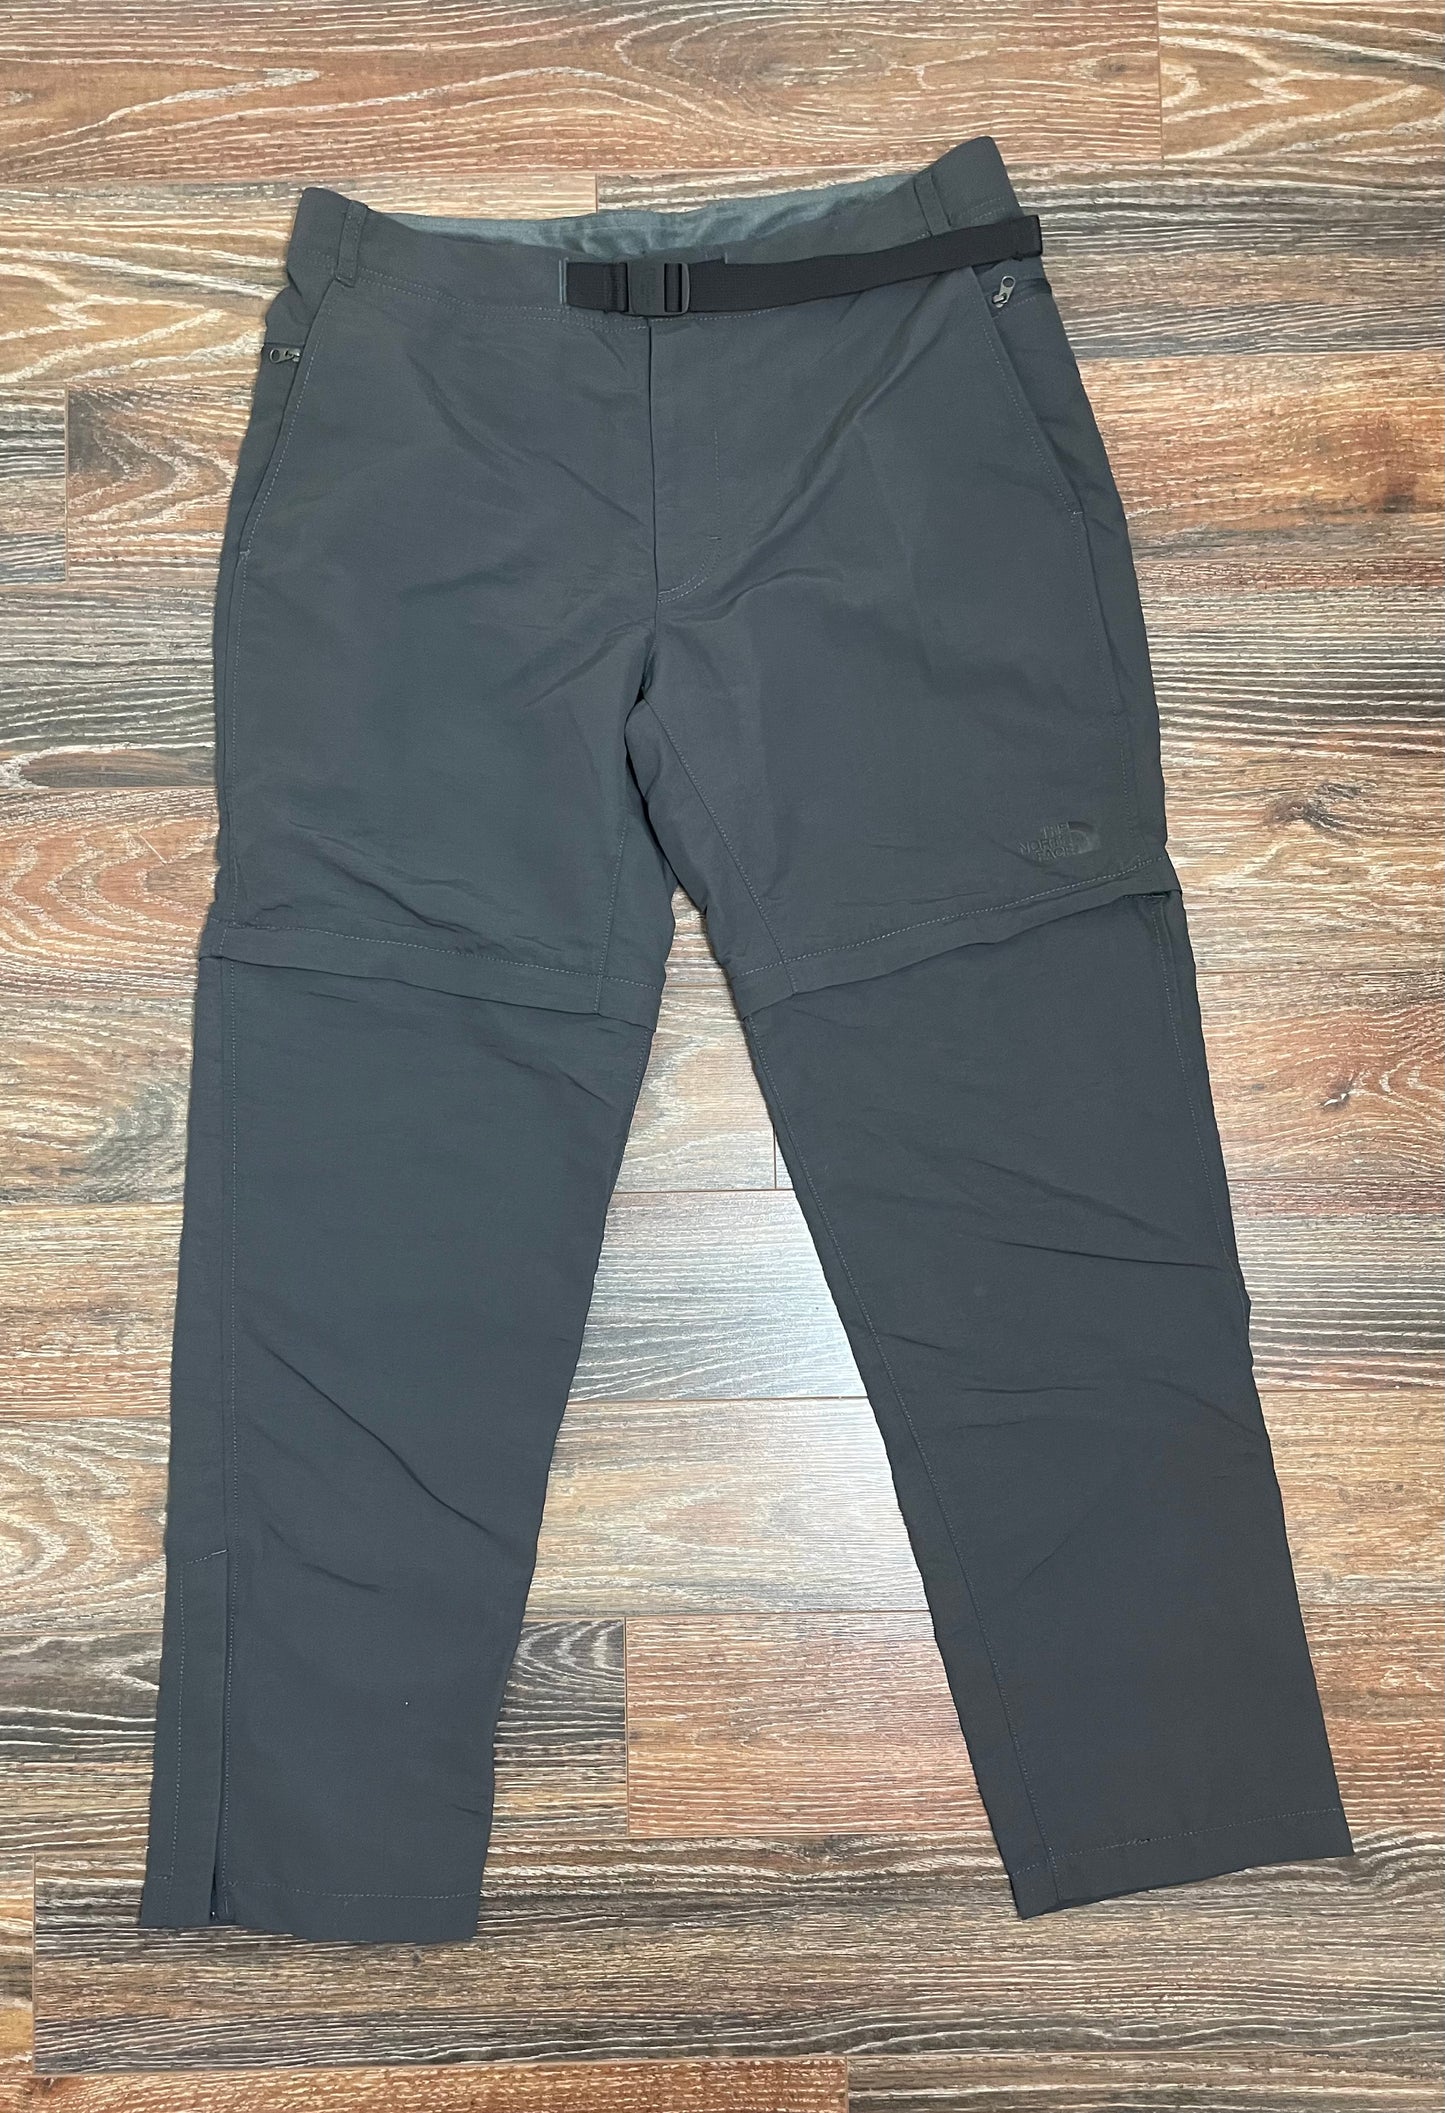 Men’s The North Face Paramount Trail Convertible Pants (34)